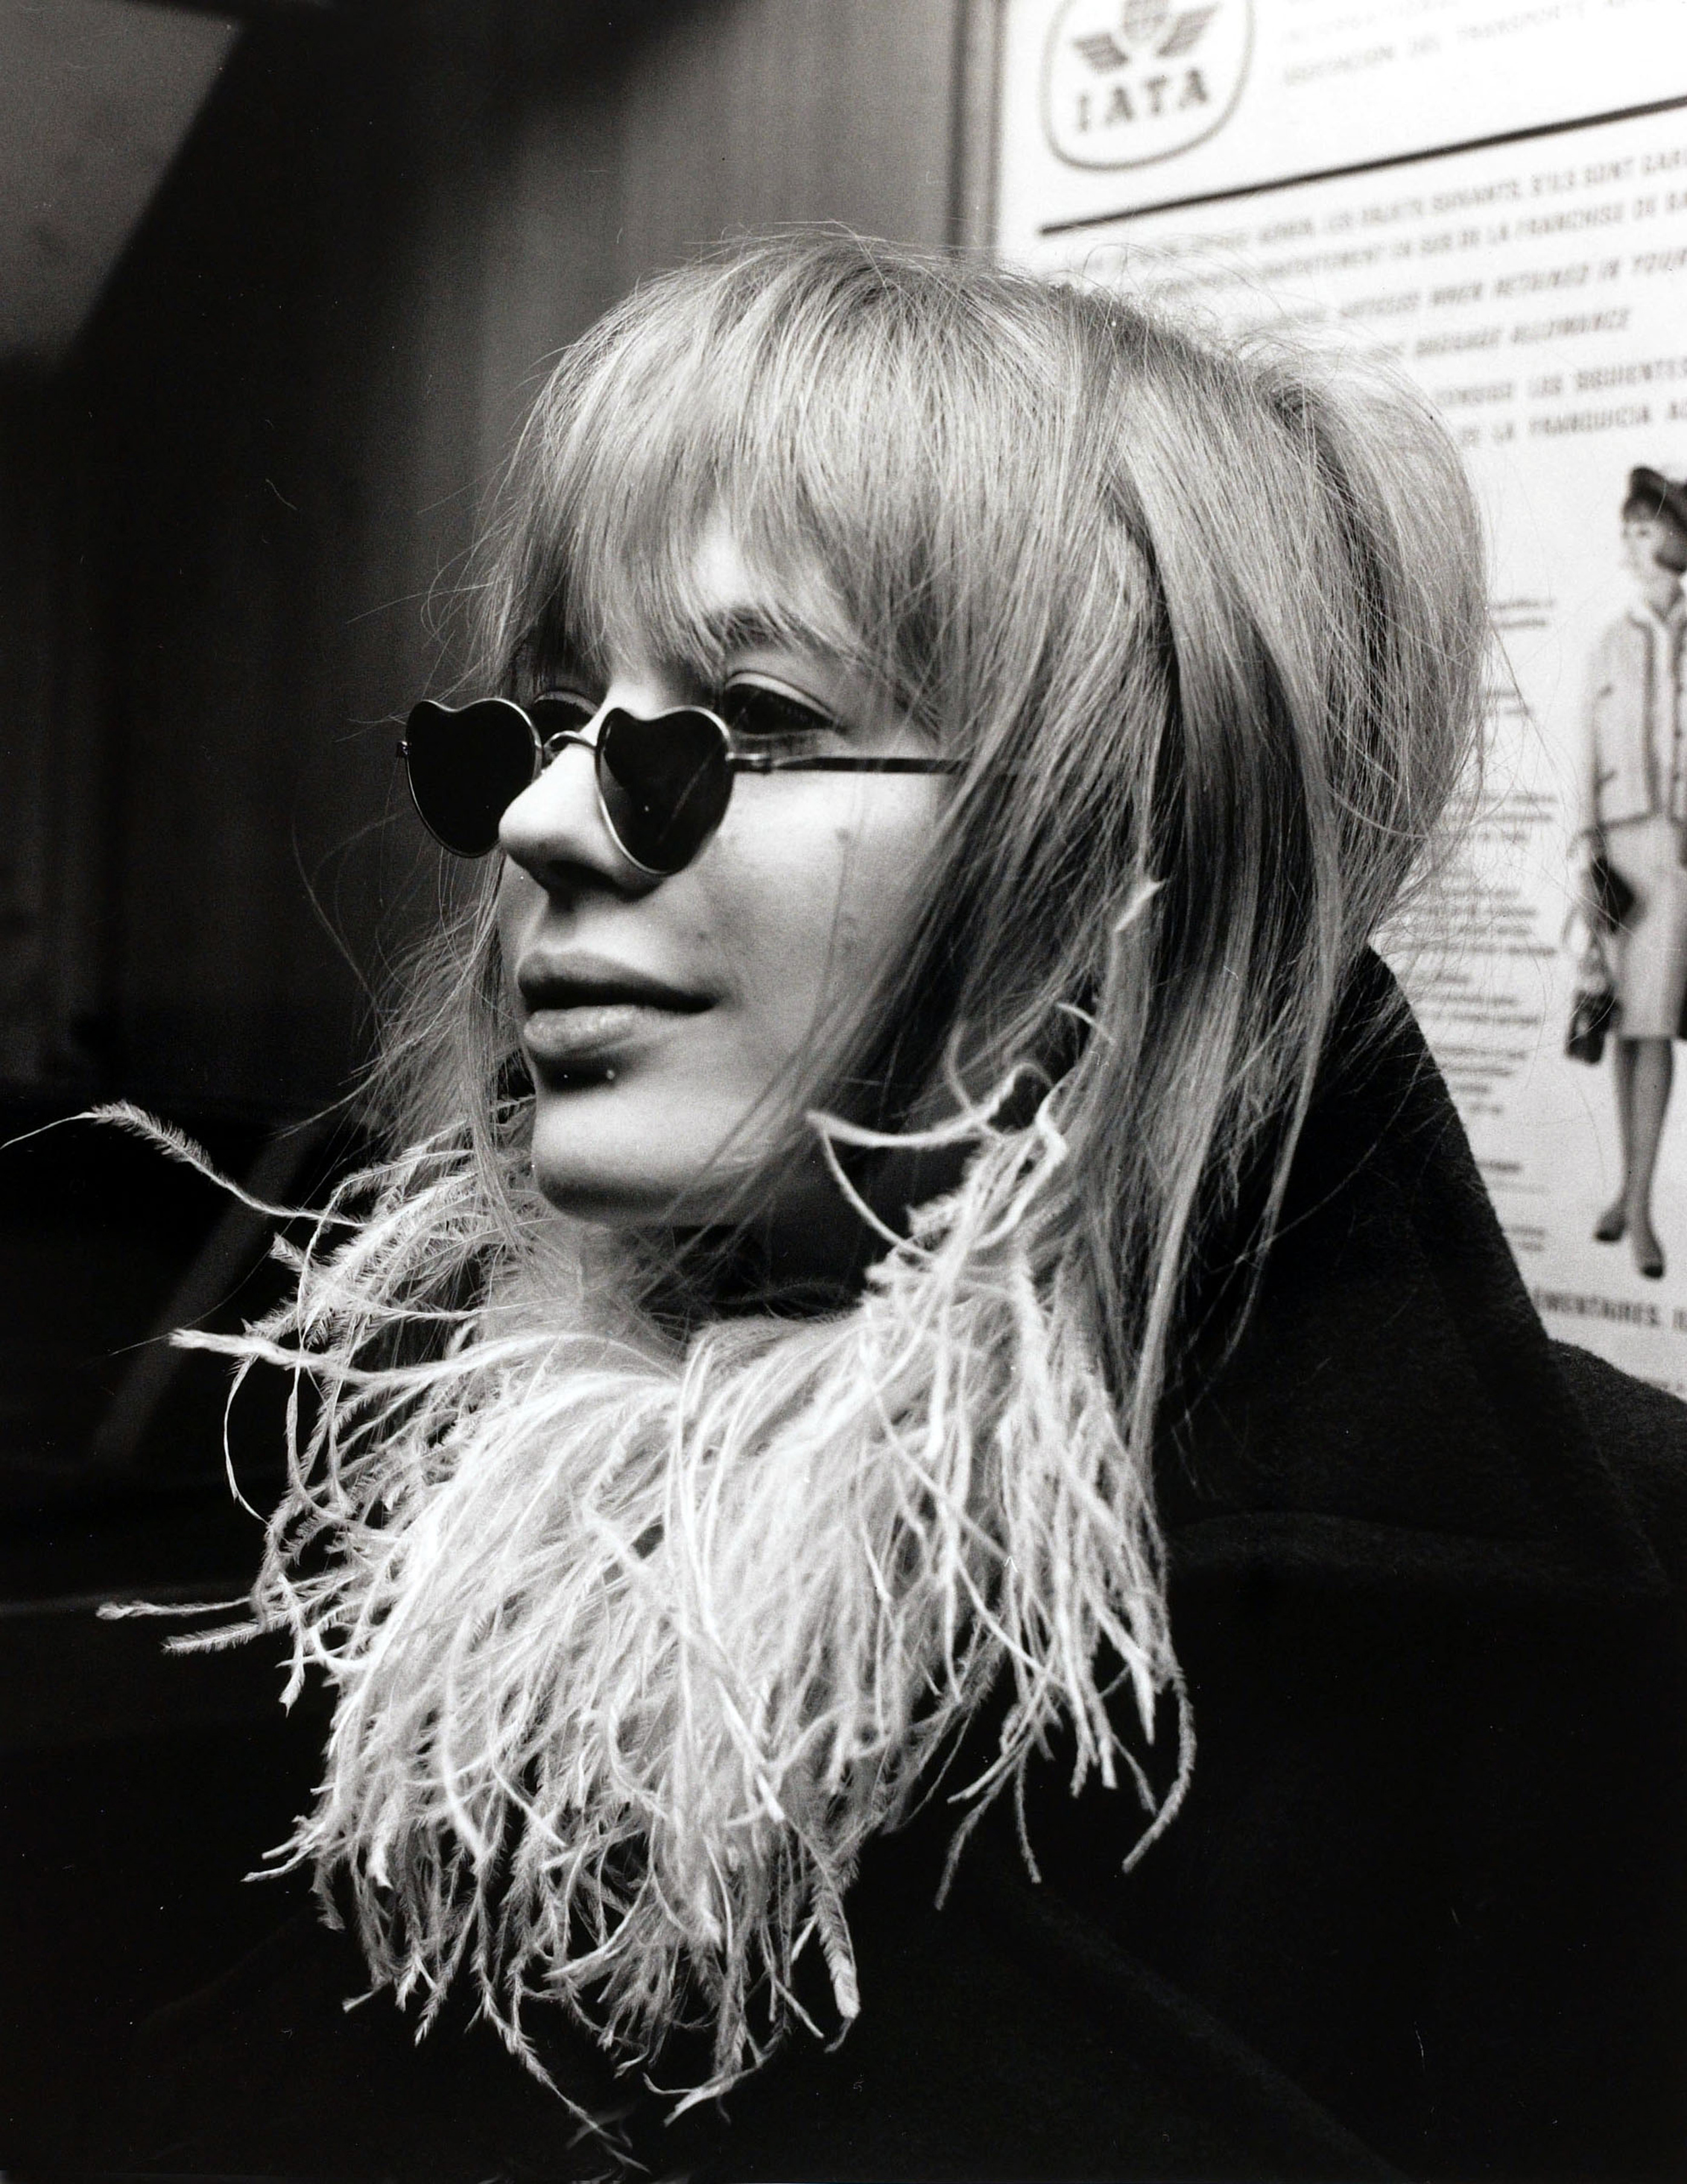 Entertainment/Pop Music. 21st January 1967. British pop star Marianne Faithfull, pictured at Heathrow Airport en-route to an Italian pop festival. Marianne Faithfull was one of the celebrities of the "Swinging Sixties".